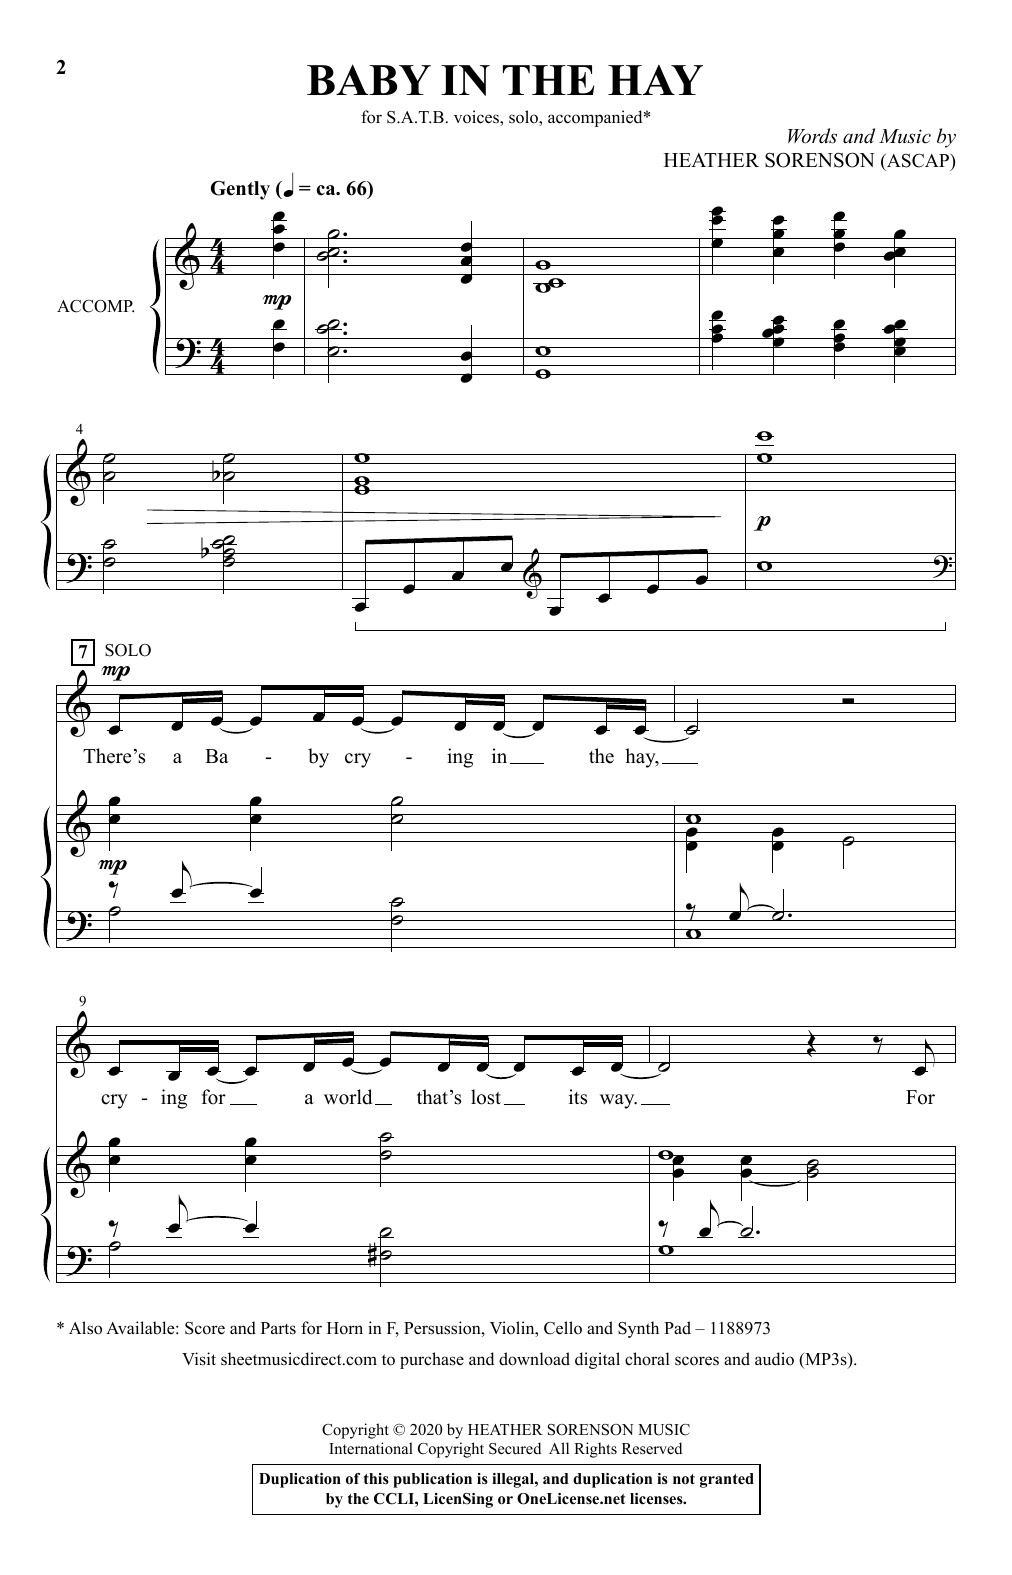 Download Heather Sorenson Baby In The Hay Sheet Music